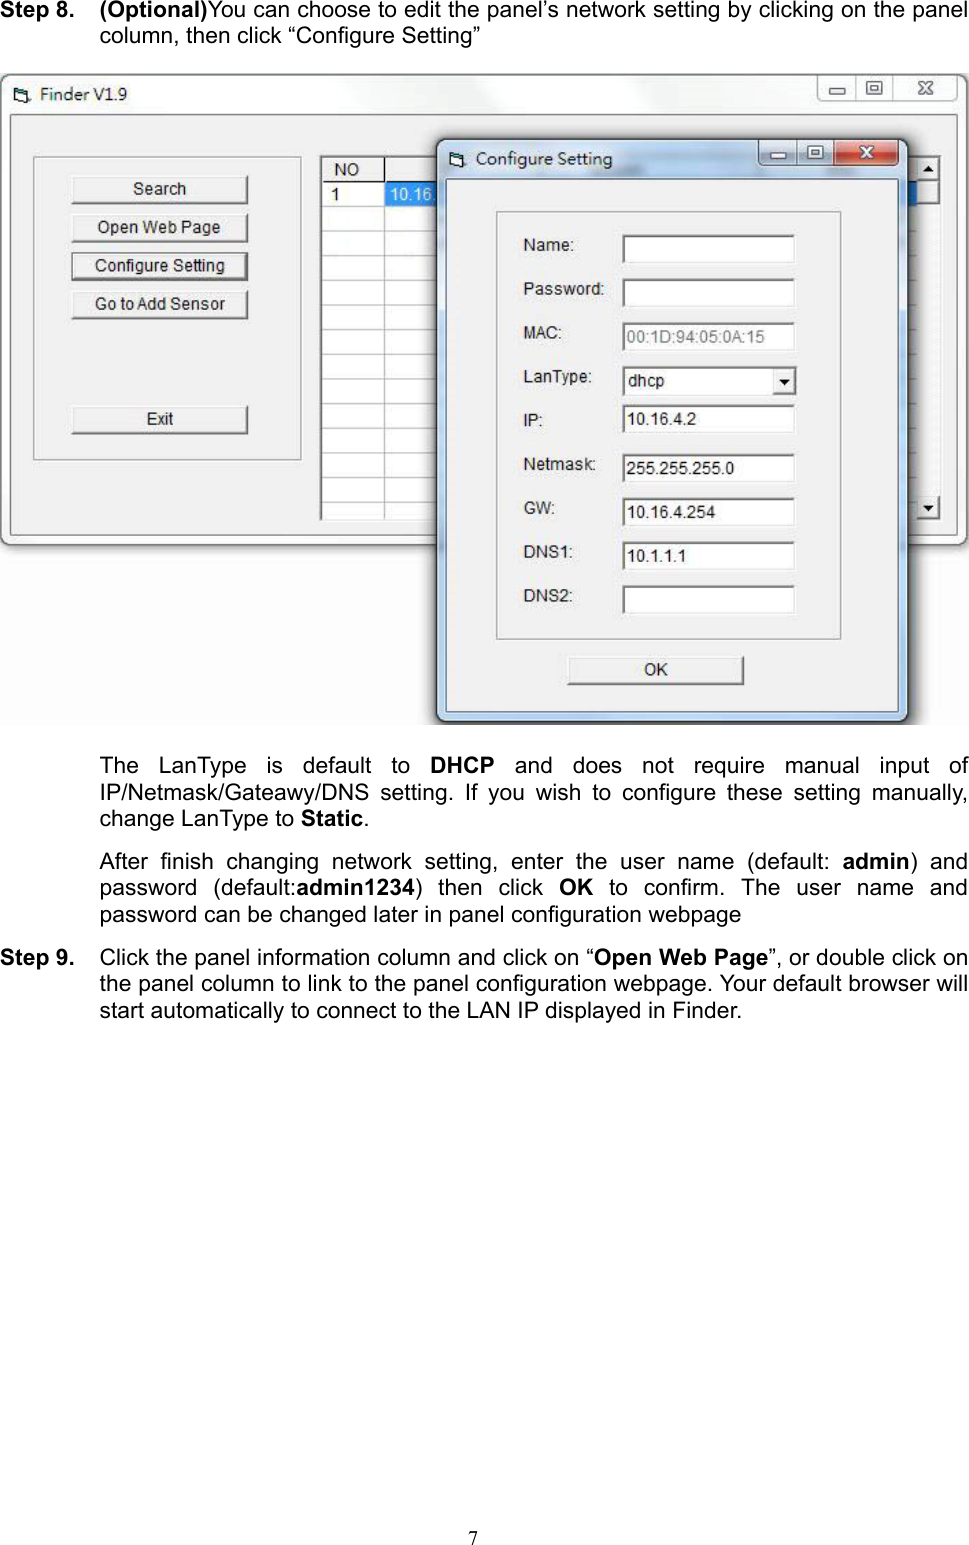  7 Step 8. (Optional)You can choose to edit the panel’s network setting by clicking on the panel column, then click “Configure Setting”    The  LanType  is  default  to  DHCP  and  does  not  require  manual  input  of IP/Netmask/Gateawy/DNS  setting.  If  you  wish  to  configure  these  setting  manually, change LanType to Static.   After  finish  changing  network  setting,  enter  the  user  name  (default:  admin)  and password  (default:admin1234)  then  click  OK  to  confirm.  The  user  name  and password can be changed later in panel configuration webpage Step 9.  Click the panel information column and click on “Open Web Page”, or double click on the panel column to link to the panel configuration webpage. Your default browser will start automatically to connect to the LAN IP displayed in Finder.     